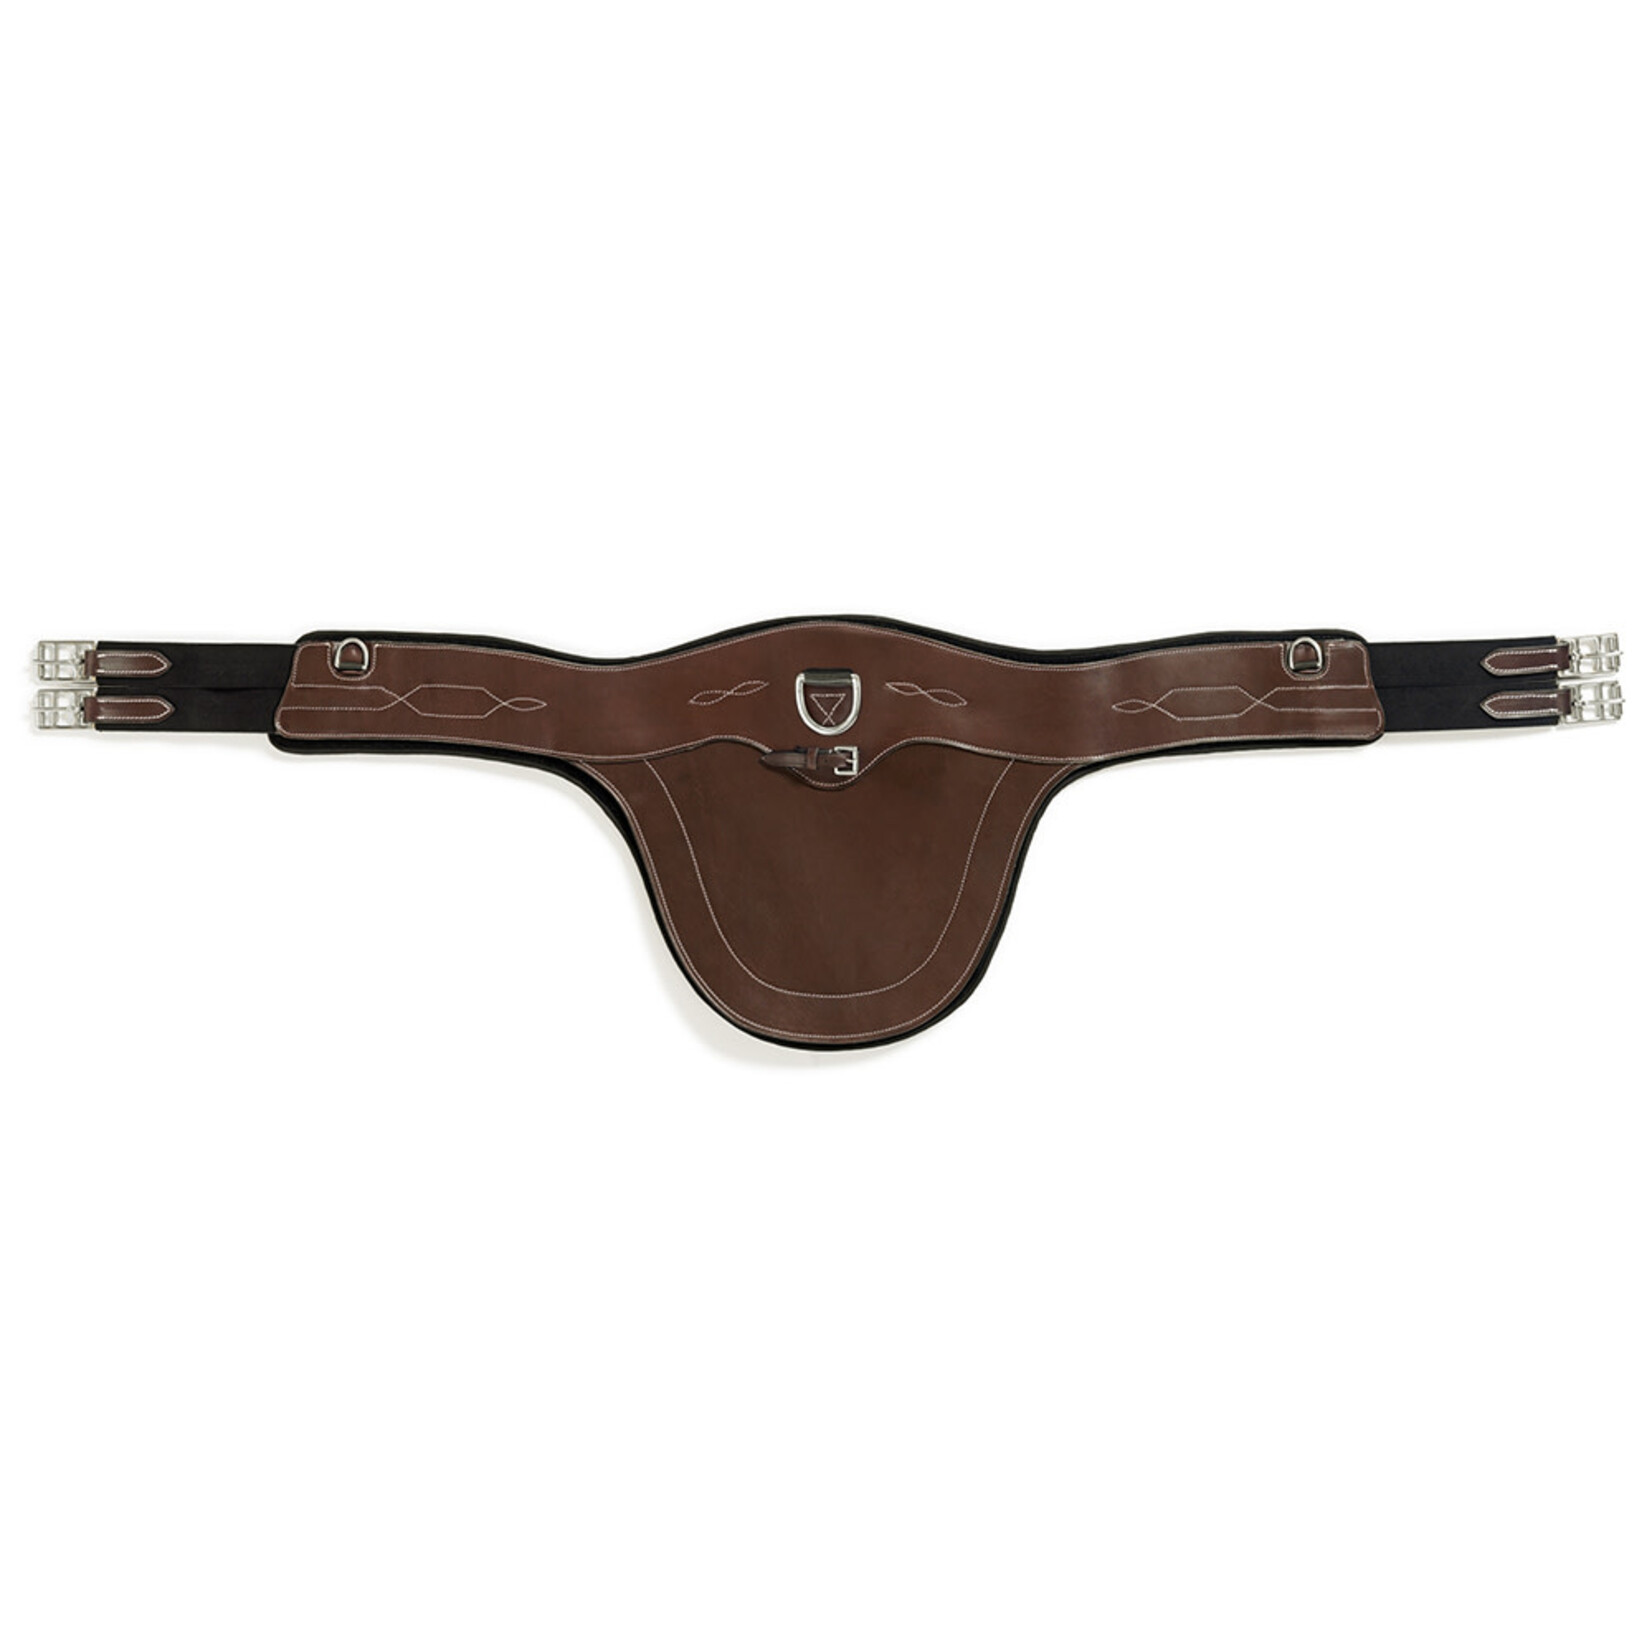 Equifit Anatomical BellyGuard Girth with T-Foam Liner